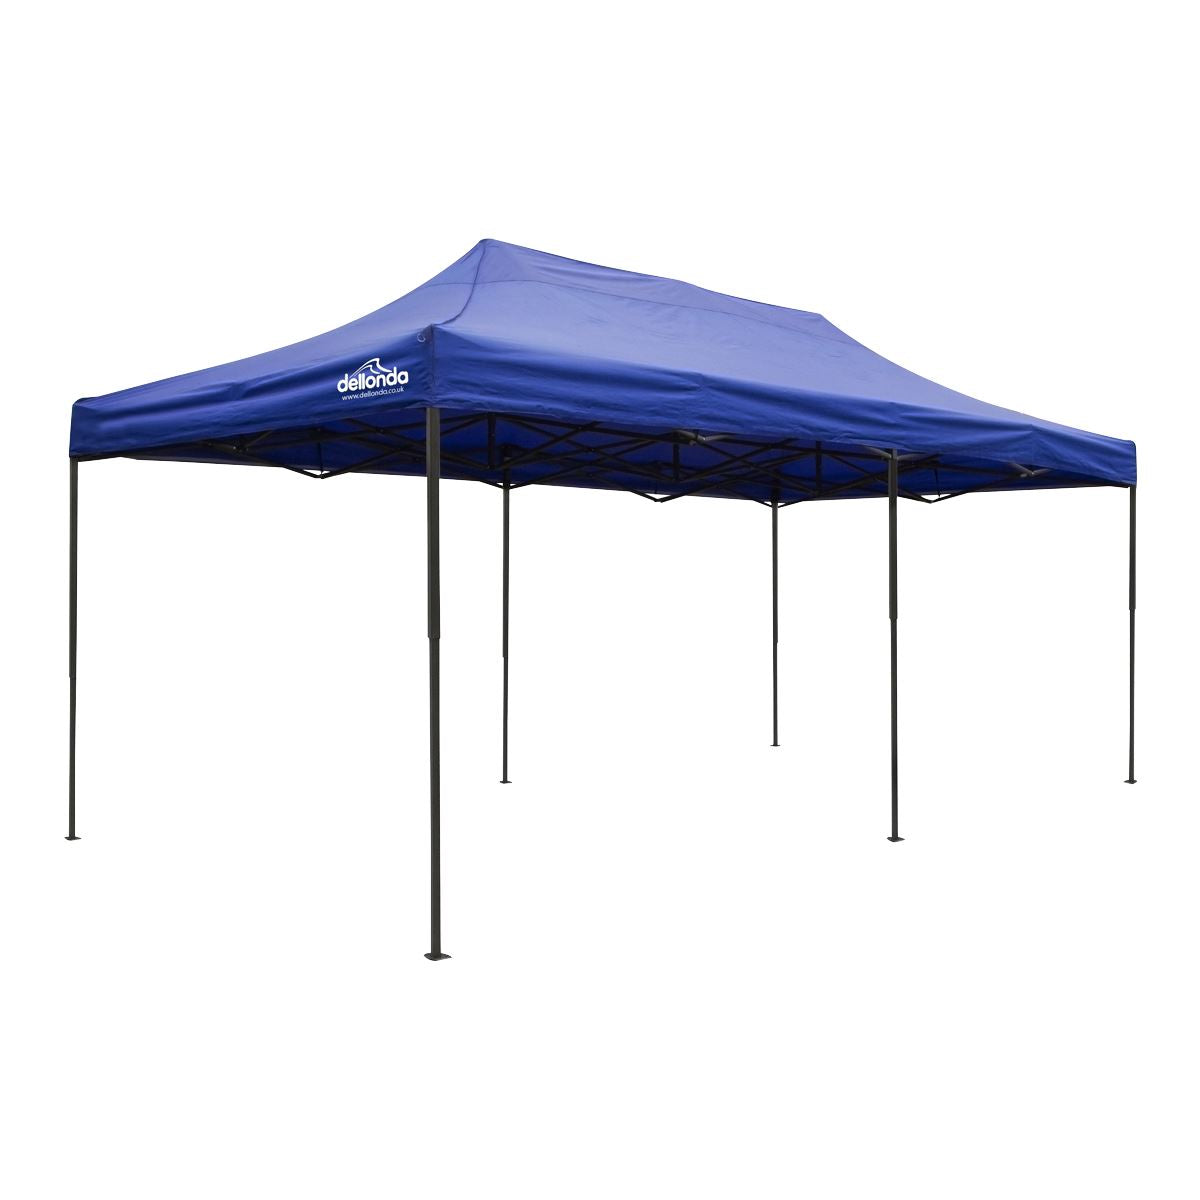 Dellonda Premium 3x6m Pop-Up Gazebo, Heavy Duty, PVC Coated, Water Resistant Fabric, Supplied with Carry Bag, Rope, Stakes & Weight Bags - Blue Canopy